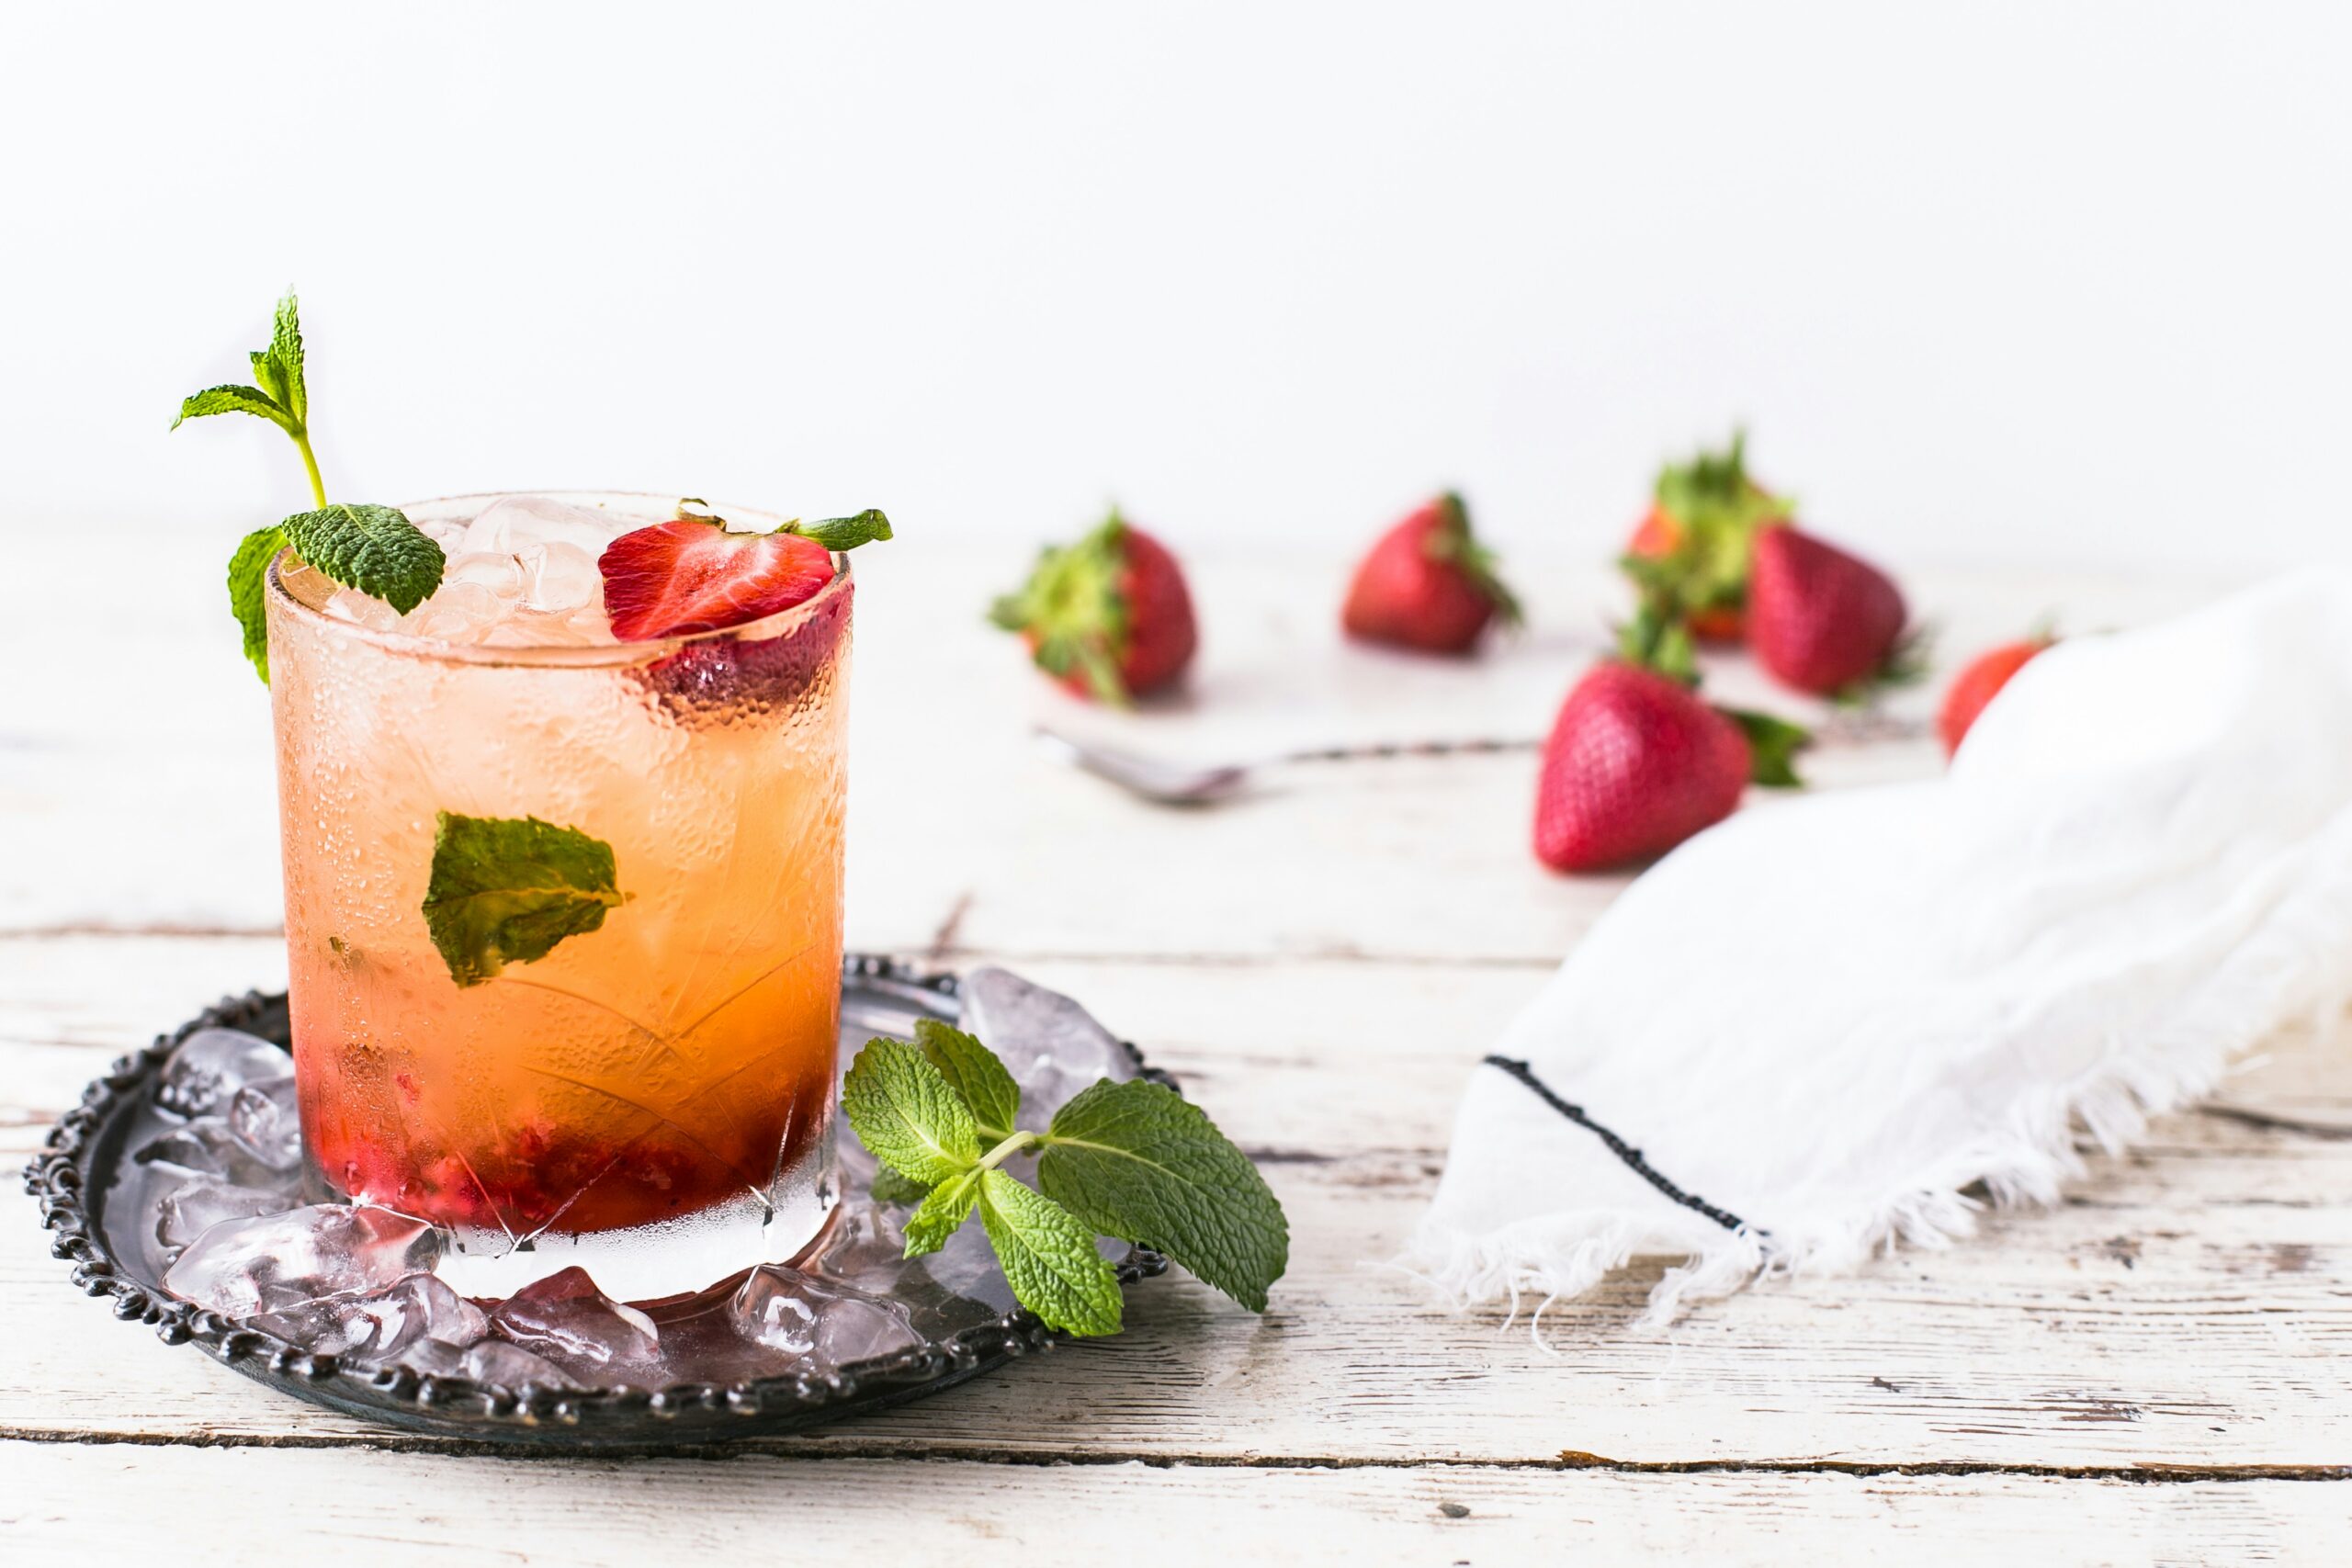 This is one of the best tequila cocktails for a fruity and refreshing taste. Pictured: Strawberry margarita